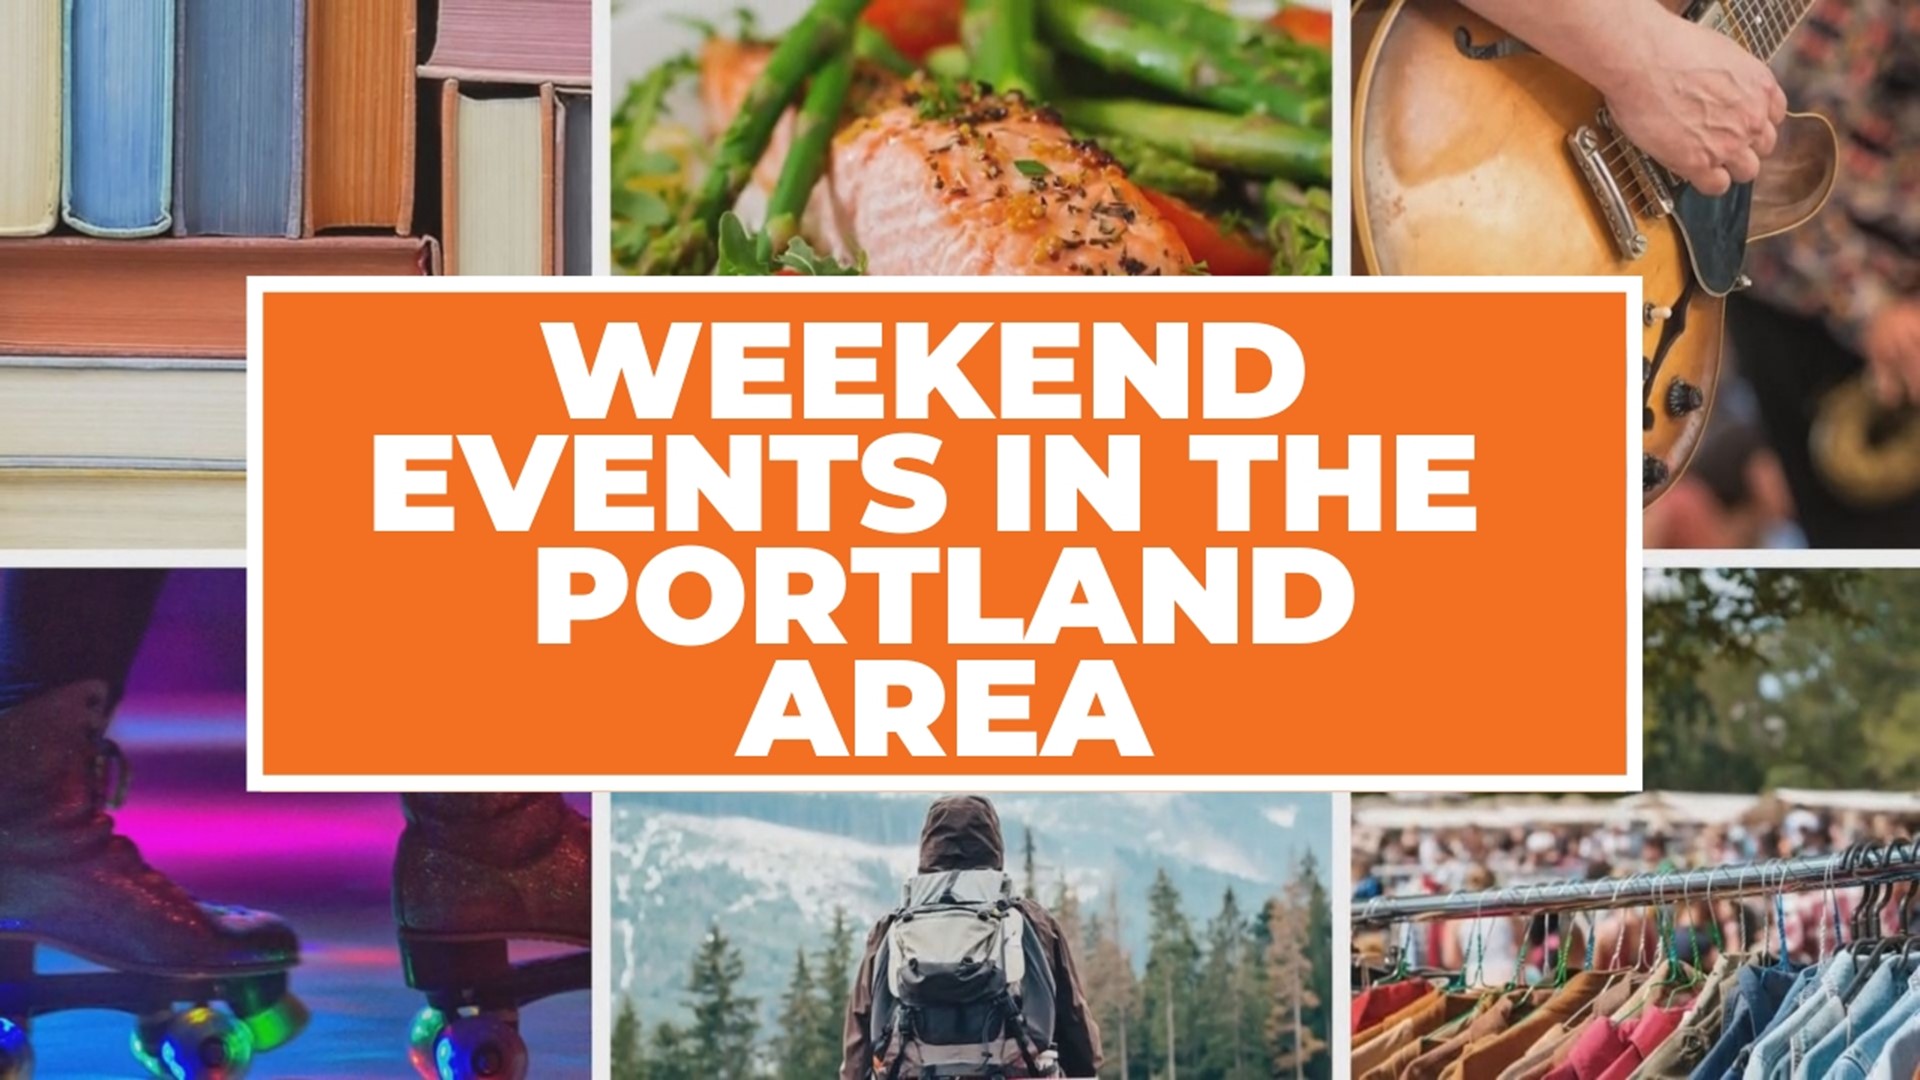 Holiday markets and concerts are dominating the events this weekend. Here are eight events happening around the Portland area.